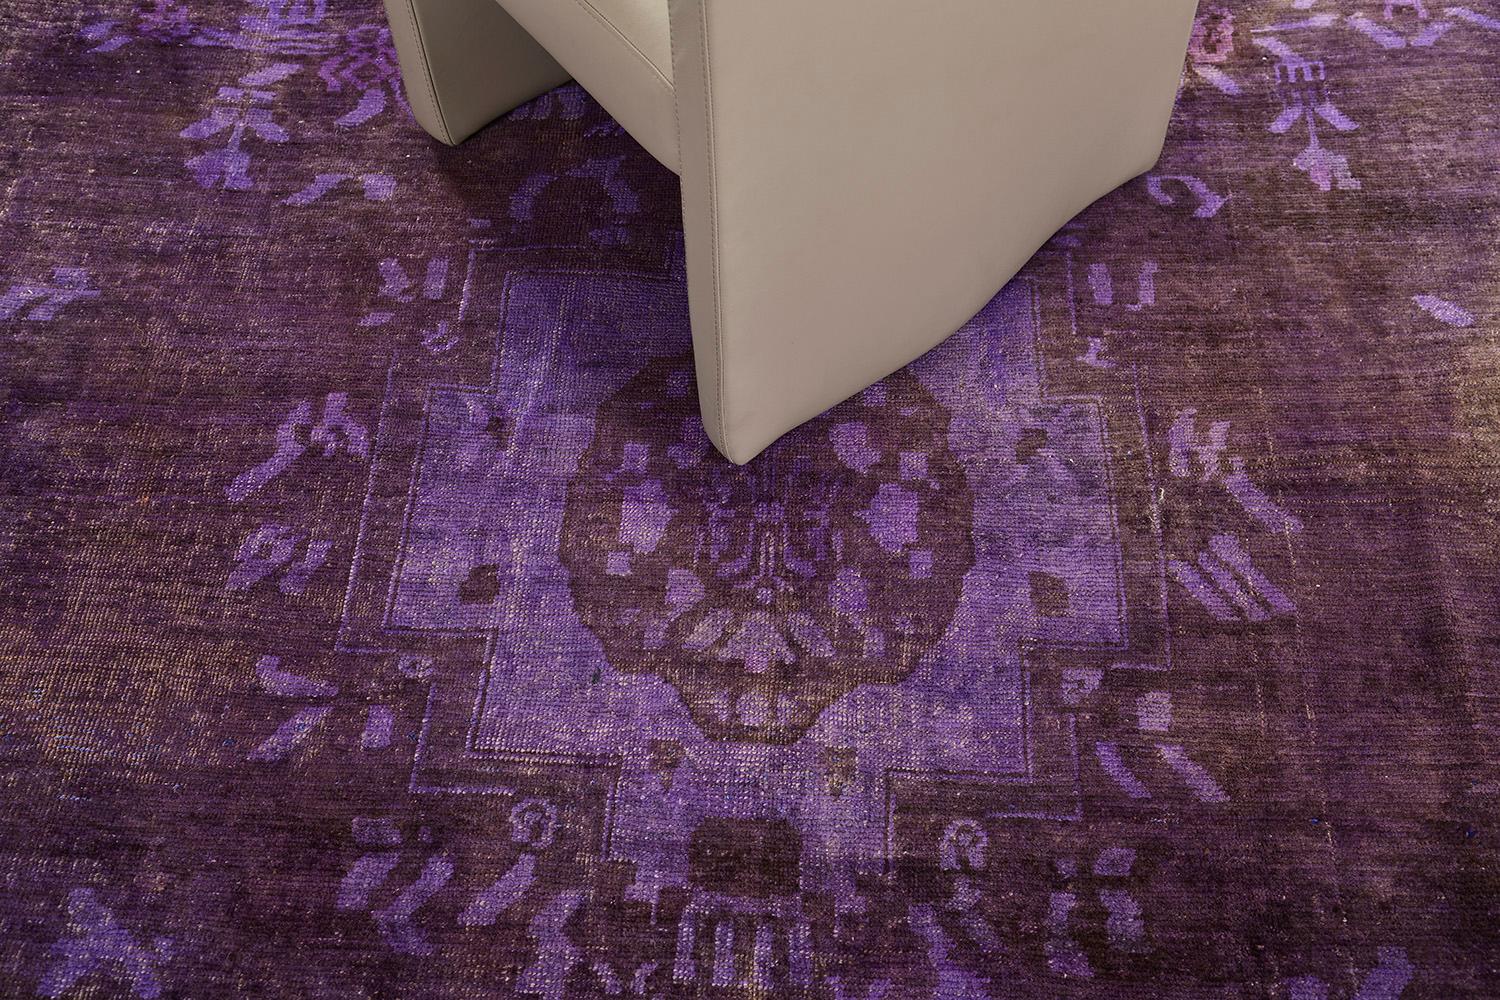 A great way to feel traditional flooring and looks more modern and contemporary style with this type of Anatolian rug. A blue purple-toned background is well coordinated with a black pigment vine pattern at the center. This overdyed Anatolian design